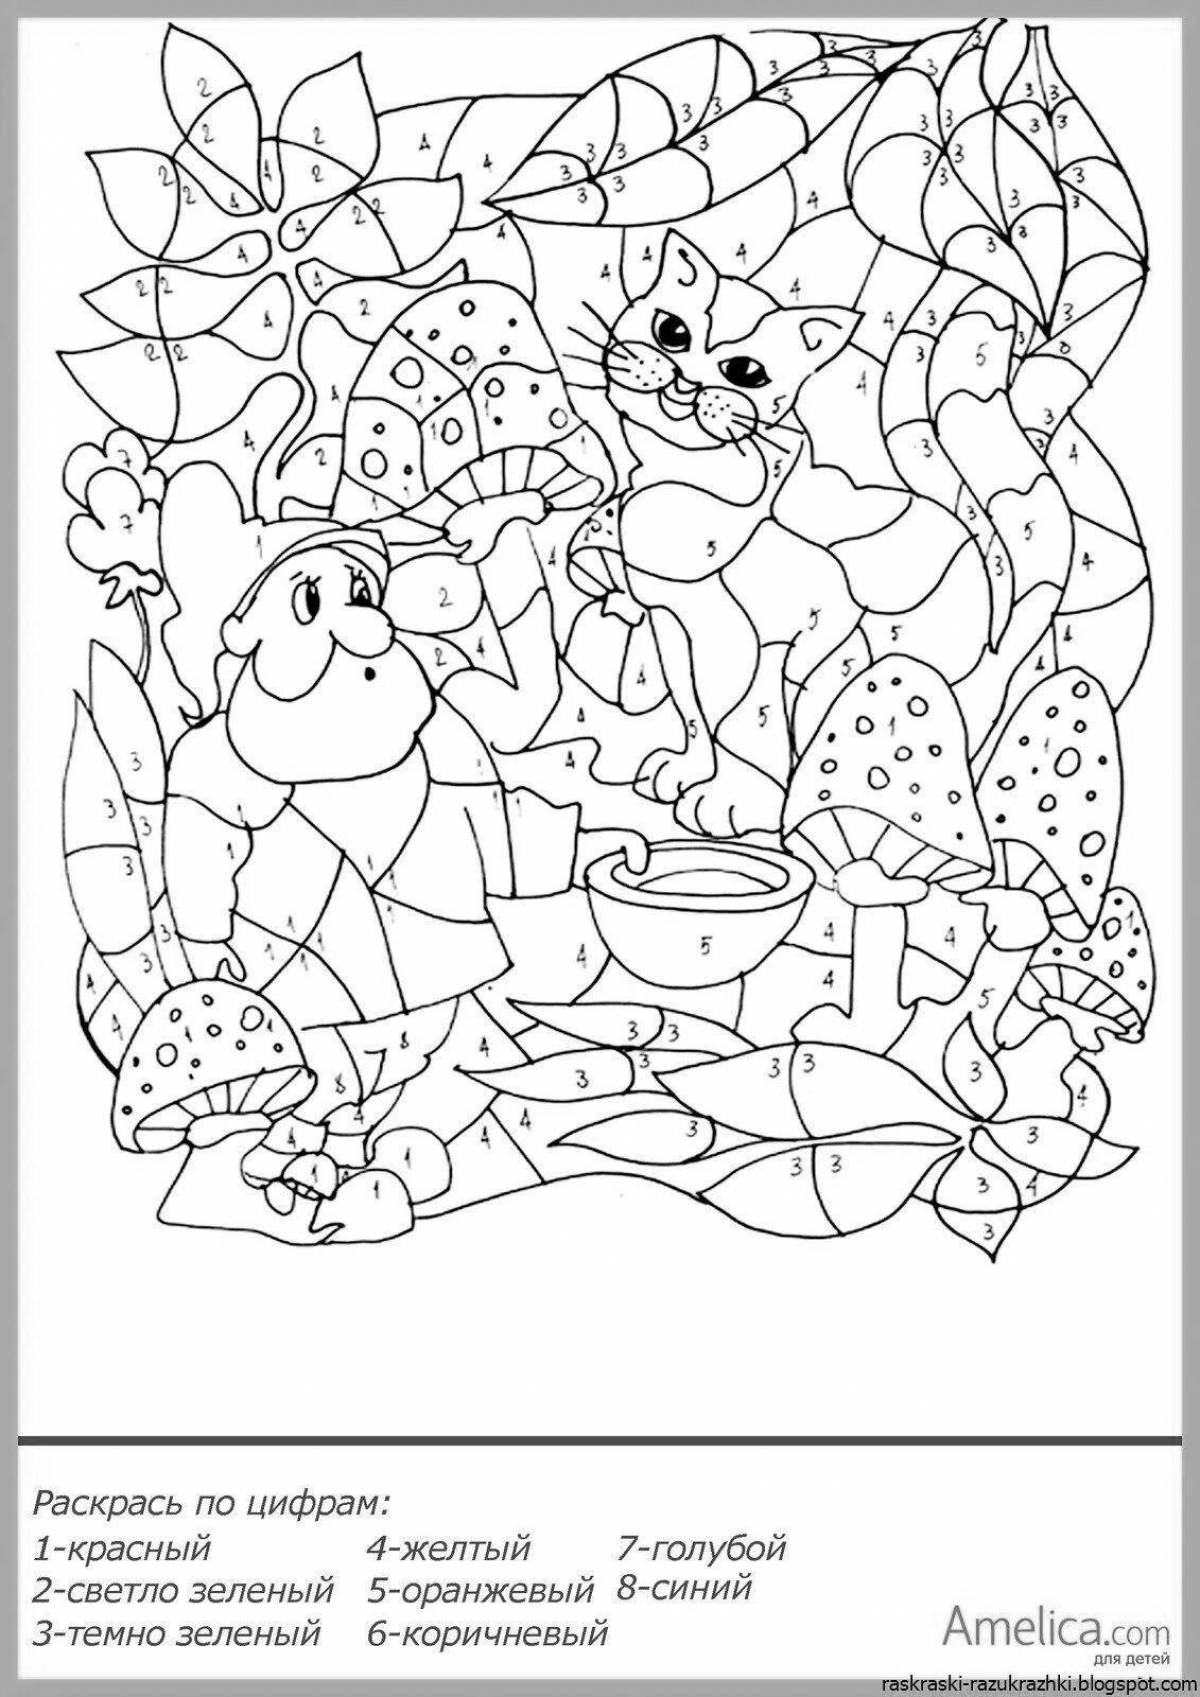 Joyful coloring by numbers for 6 years for girls